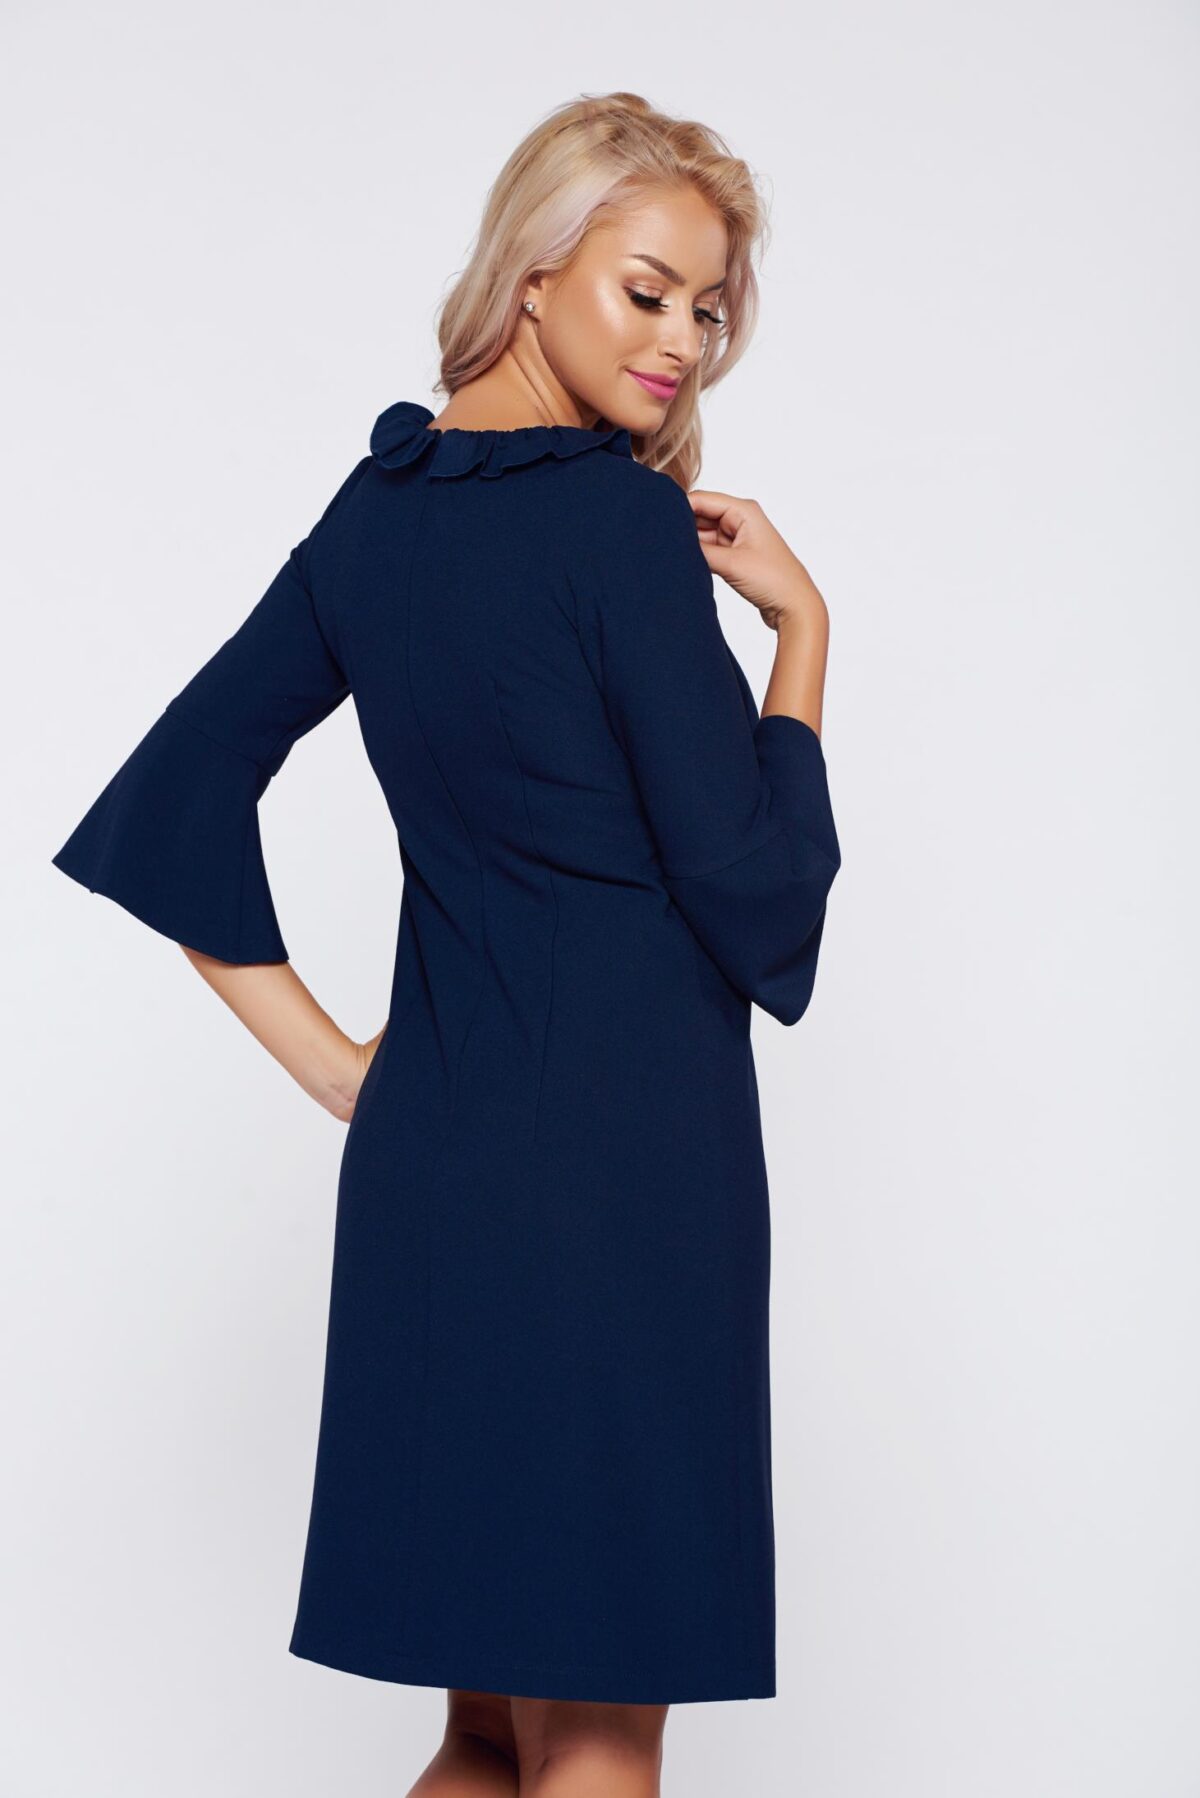 Office darkblue bell sleeve dress with ruffle details